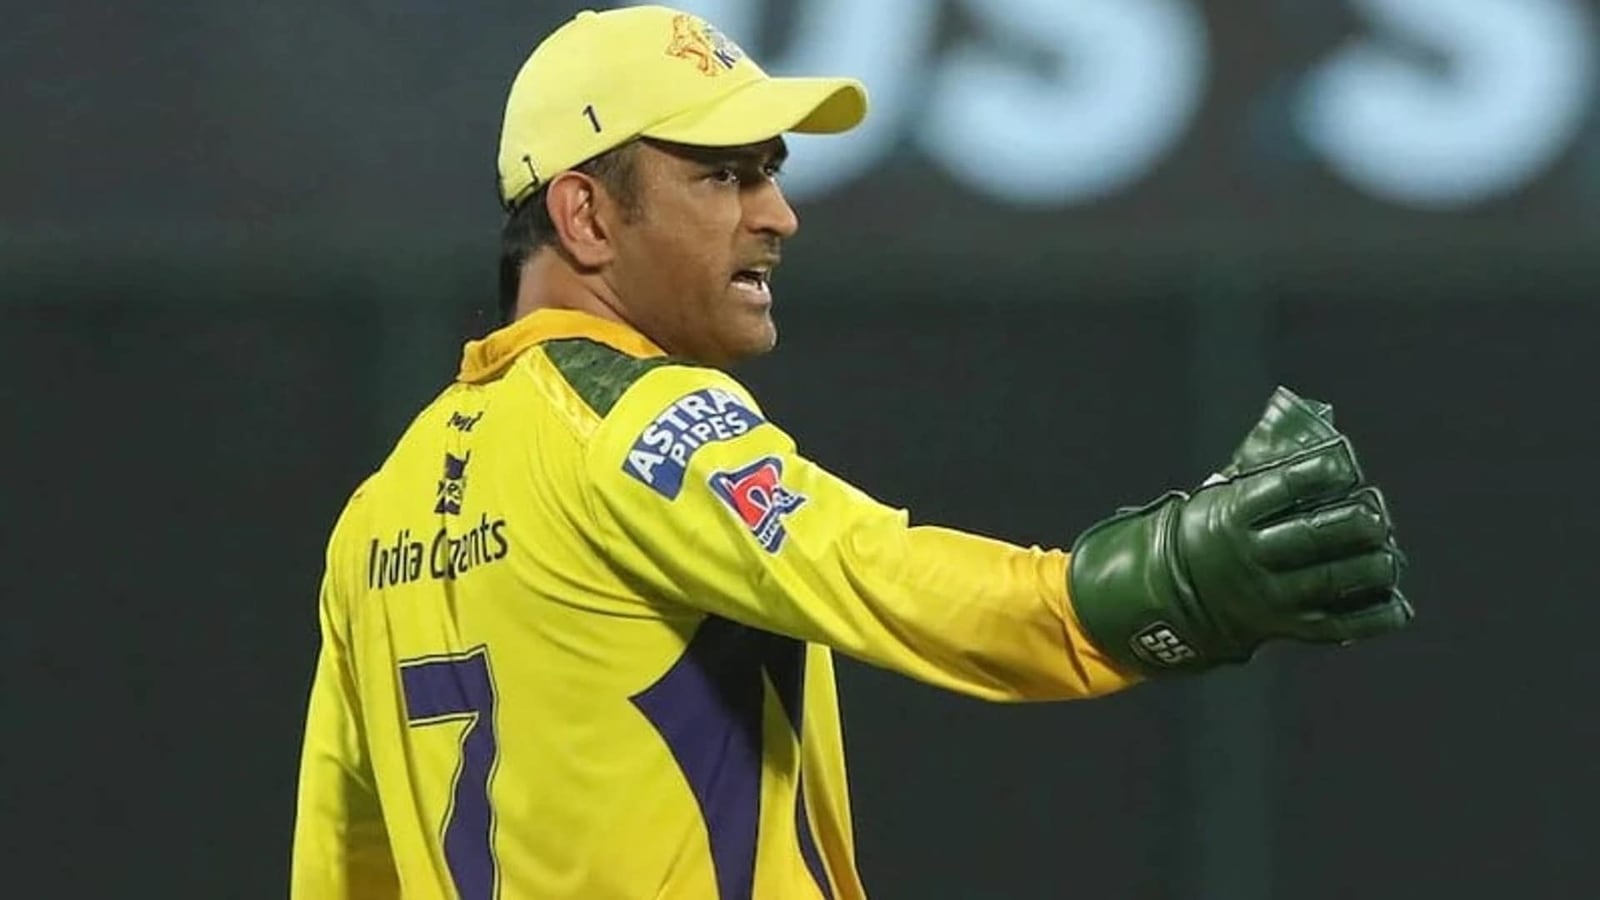 Do CSK really want a captain with 200 runs at SR of 128?': Aus legend on  Dhoni | Cricket - Hindustan Times